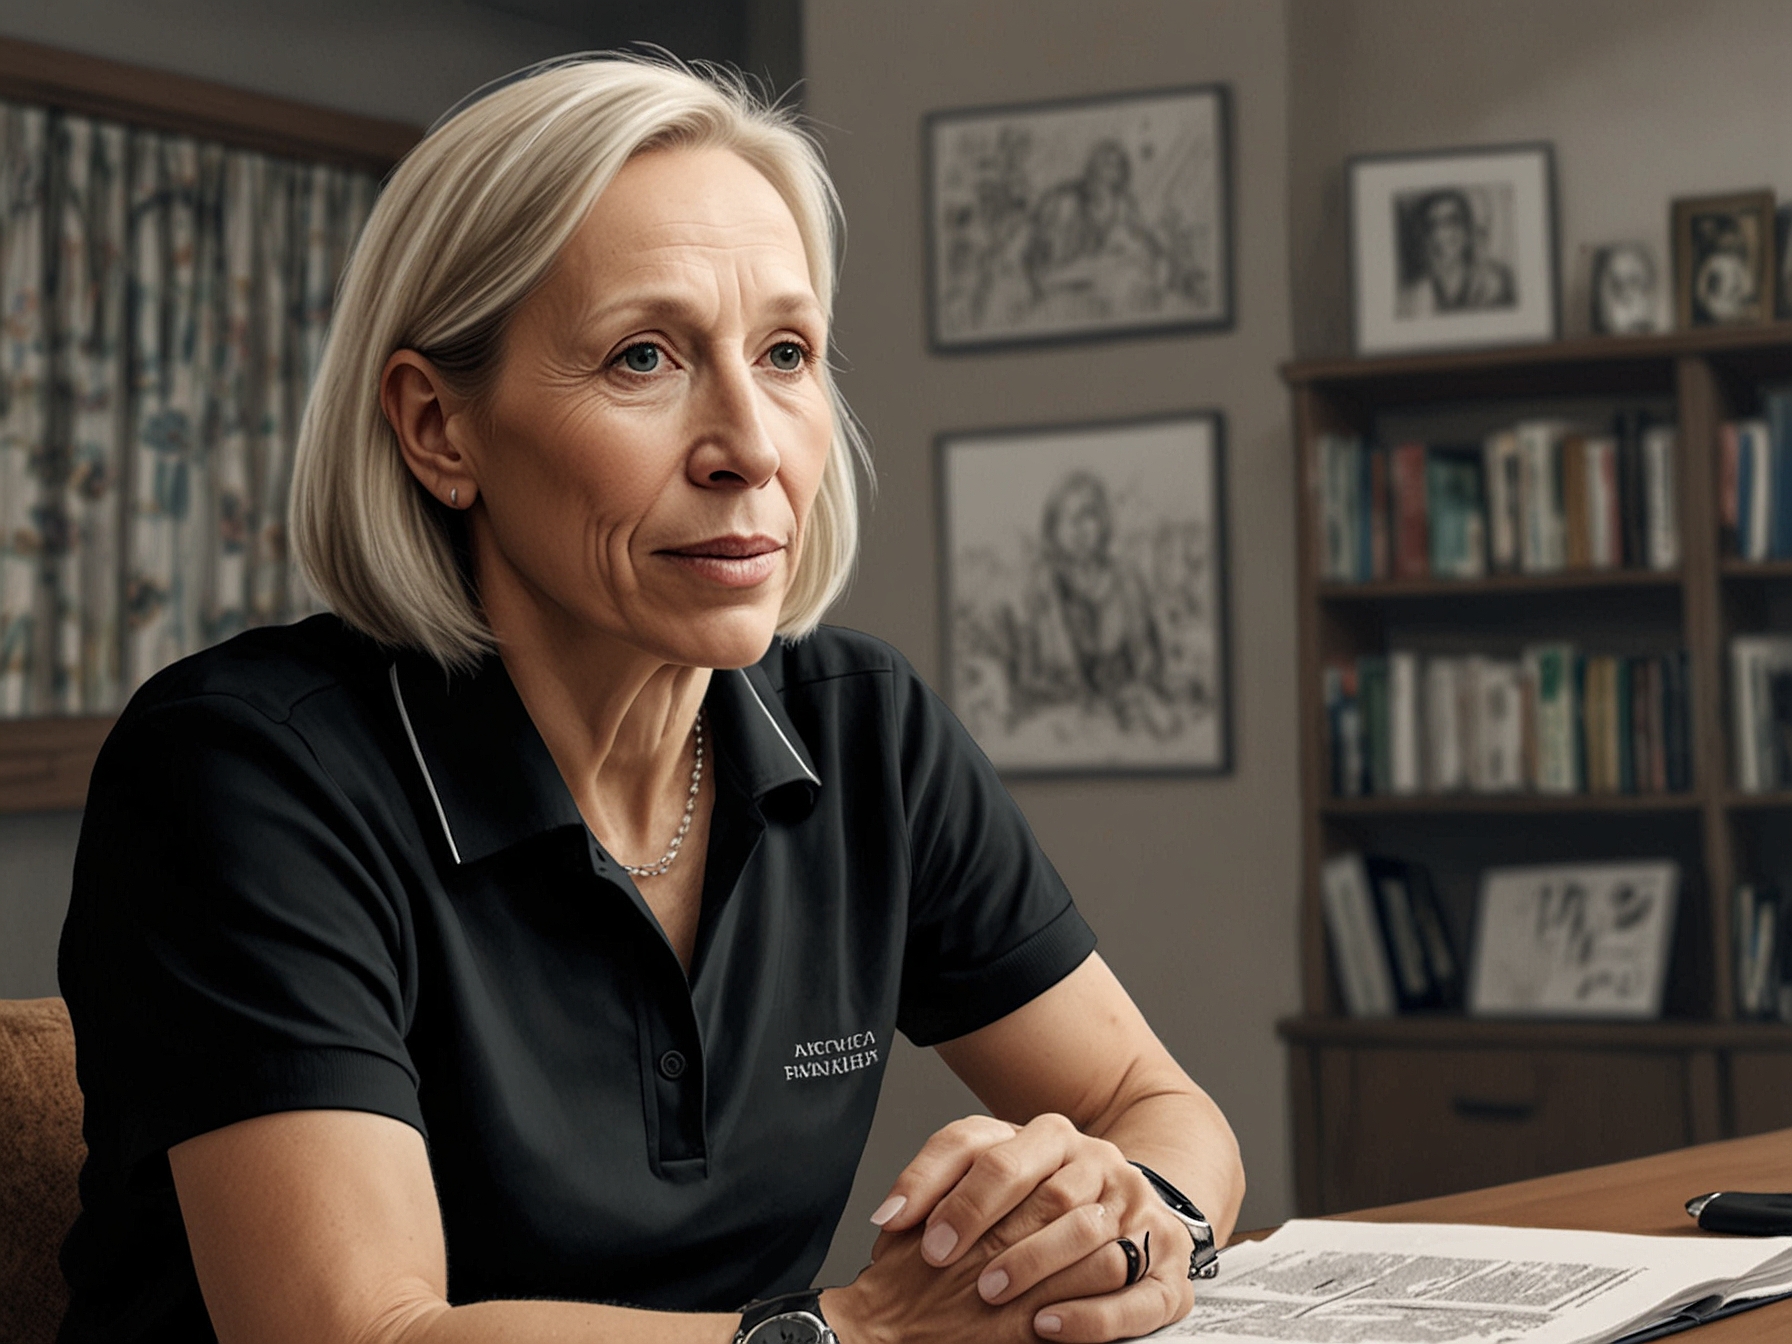 Martina Navratilova during a heated interview regarding her views on transgender women competing in women's sports, emphasizing her commitment to fairness.